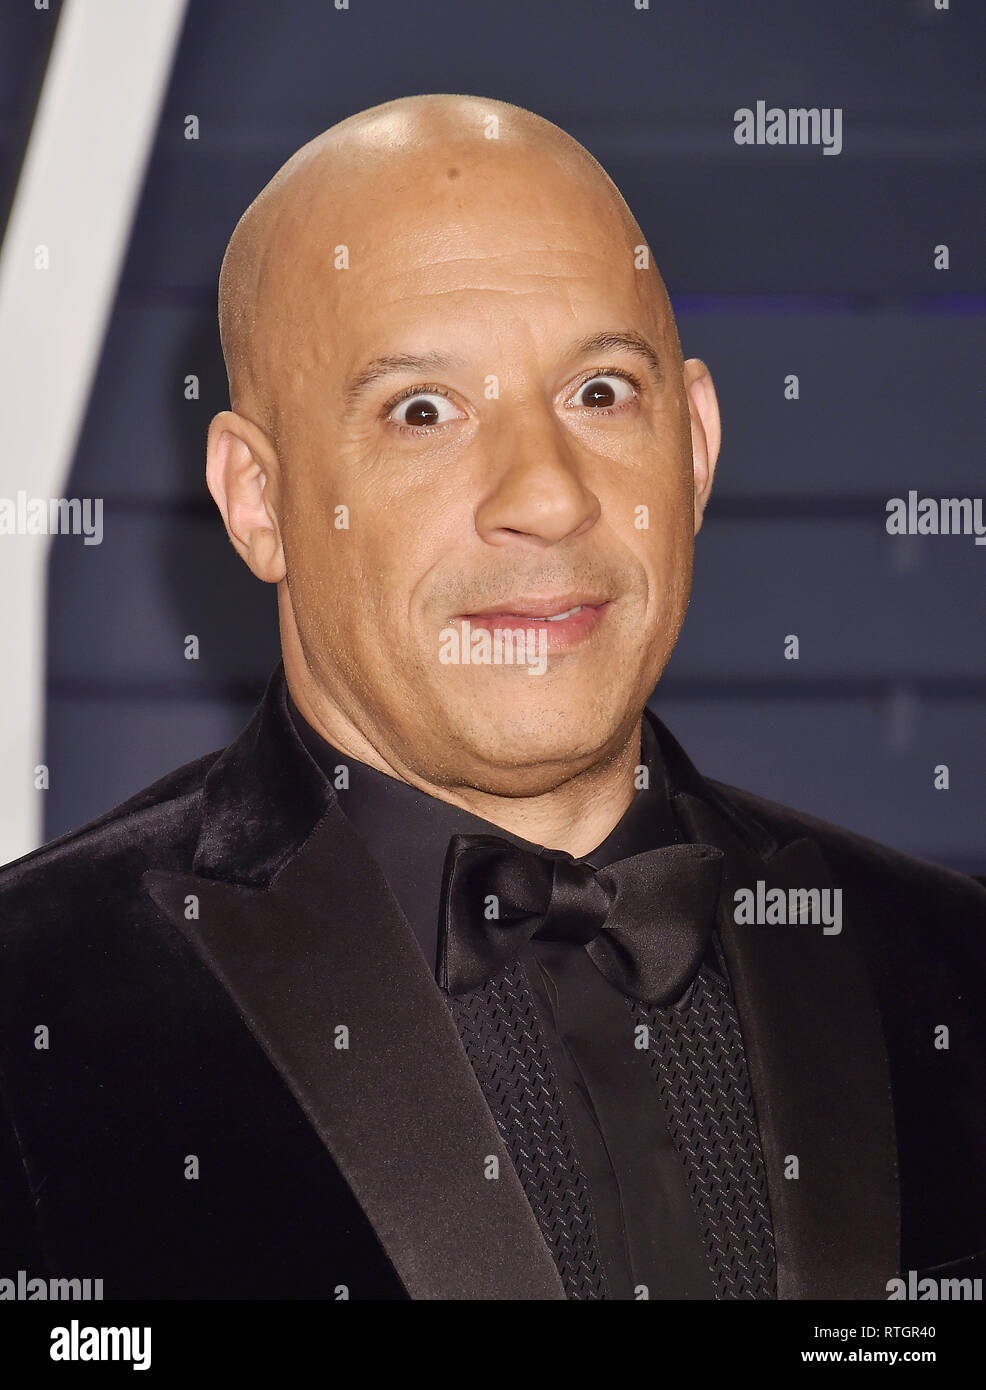 BEVERLY HILLS, CA - FEBRUARY 25: Vin Diesel attends the 2019 Vanity Fair Oscar Party hosted by Radhika Jones at Wallis Annenberg Center for the Perfor Stock Photo